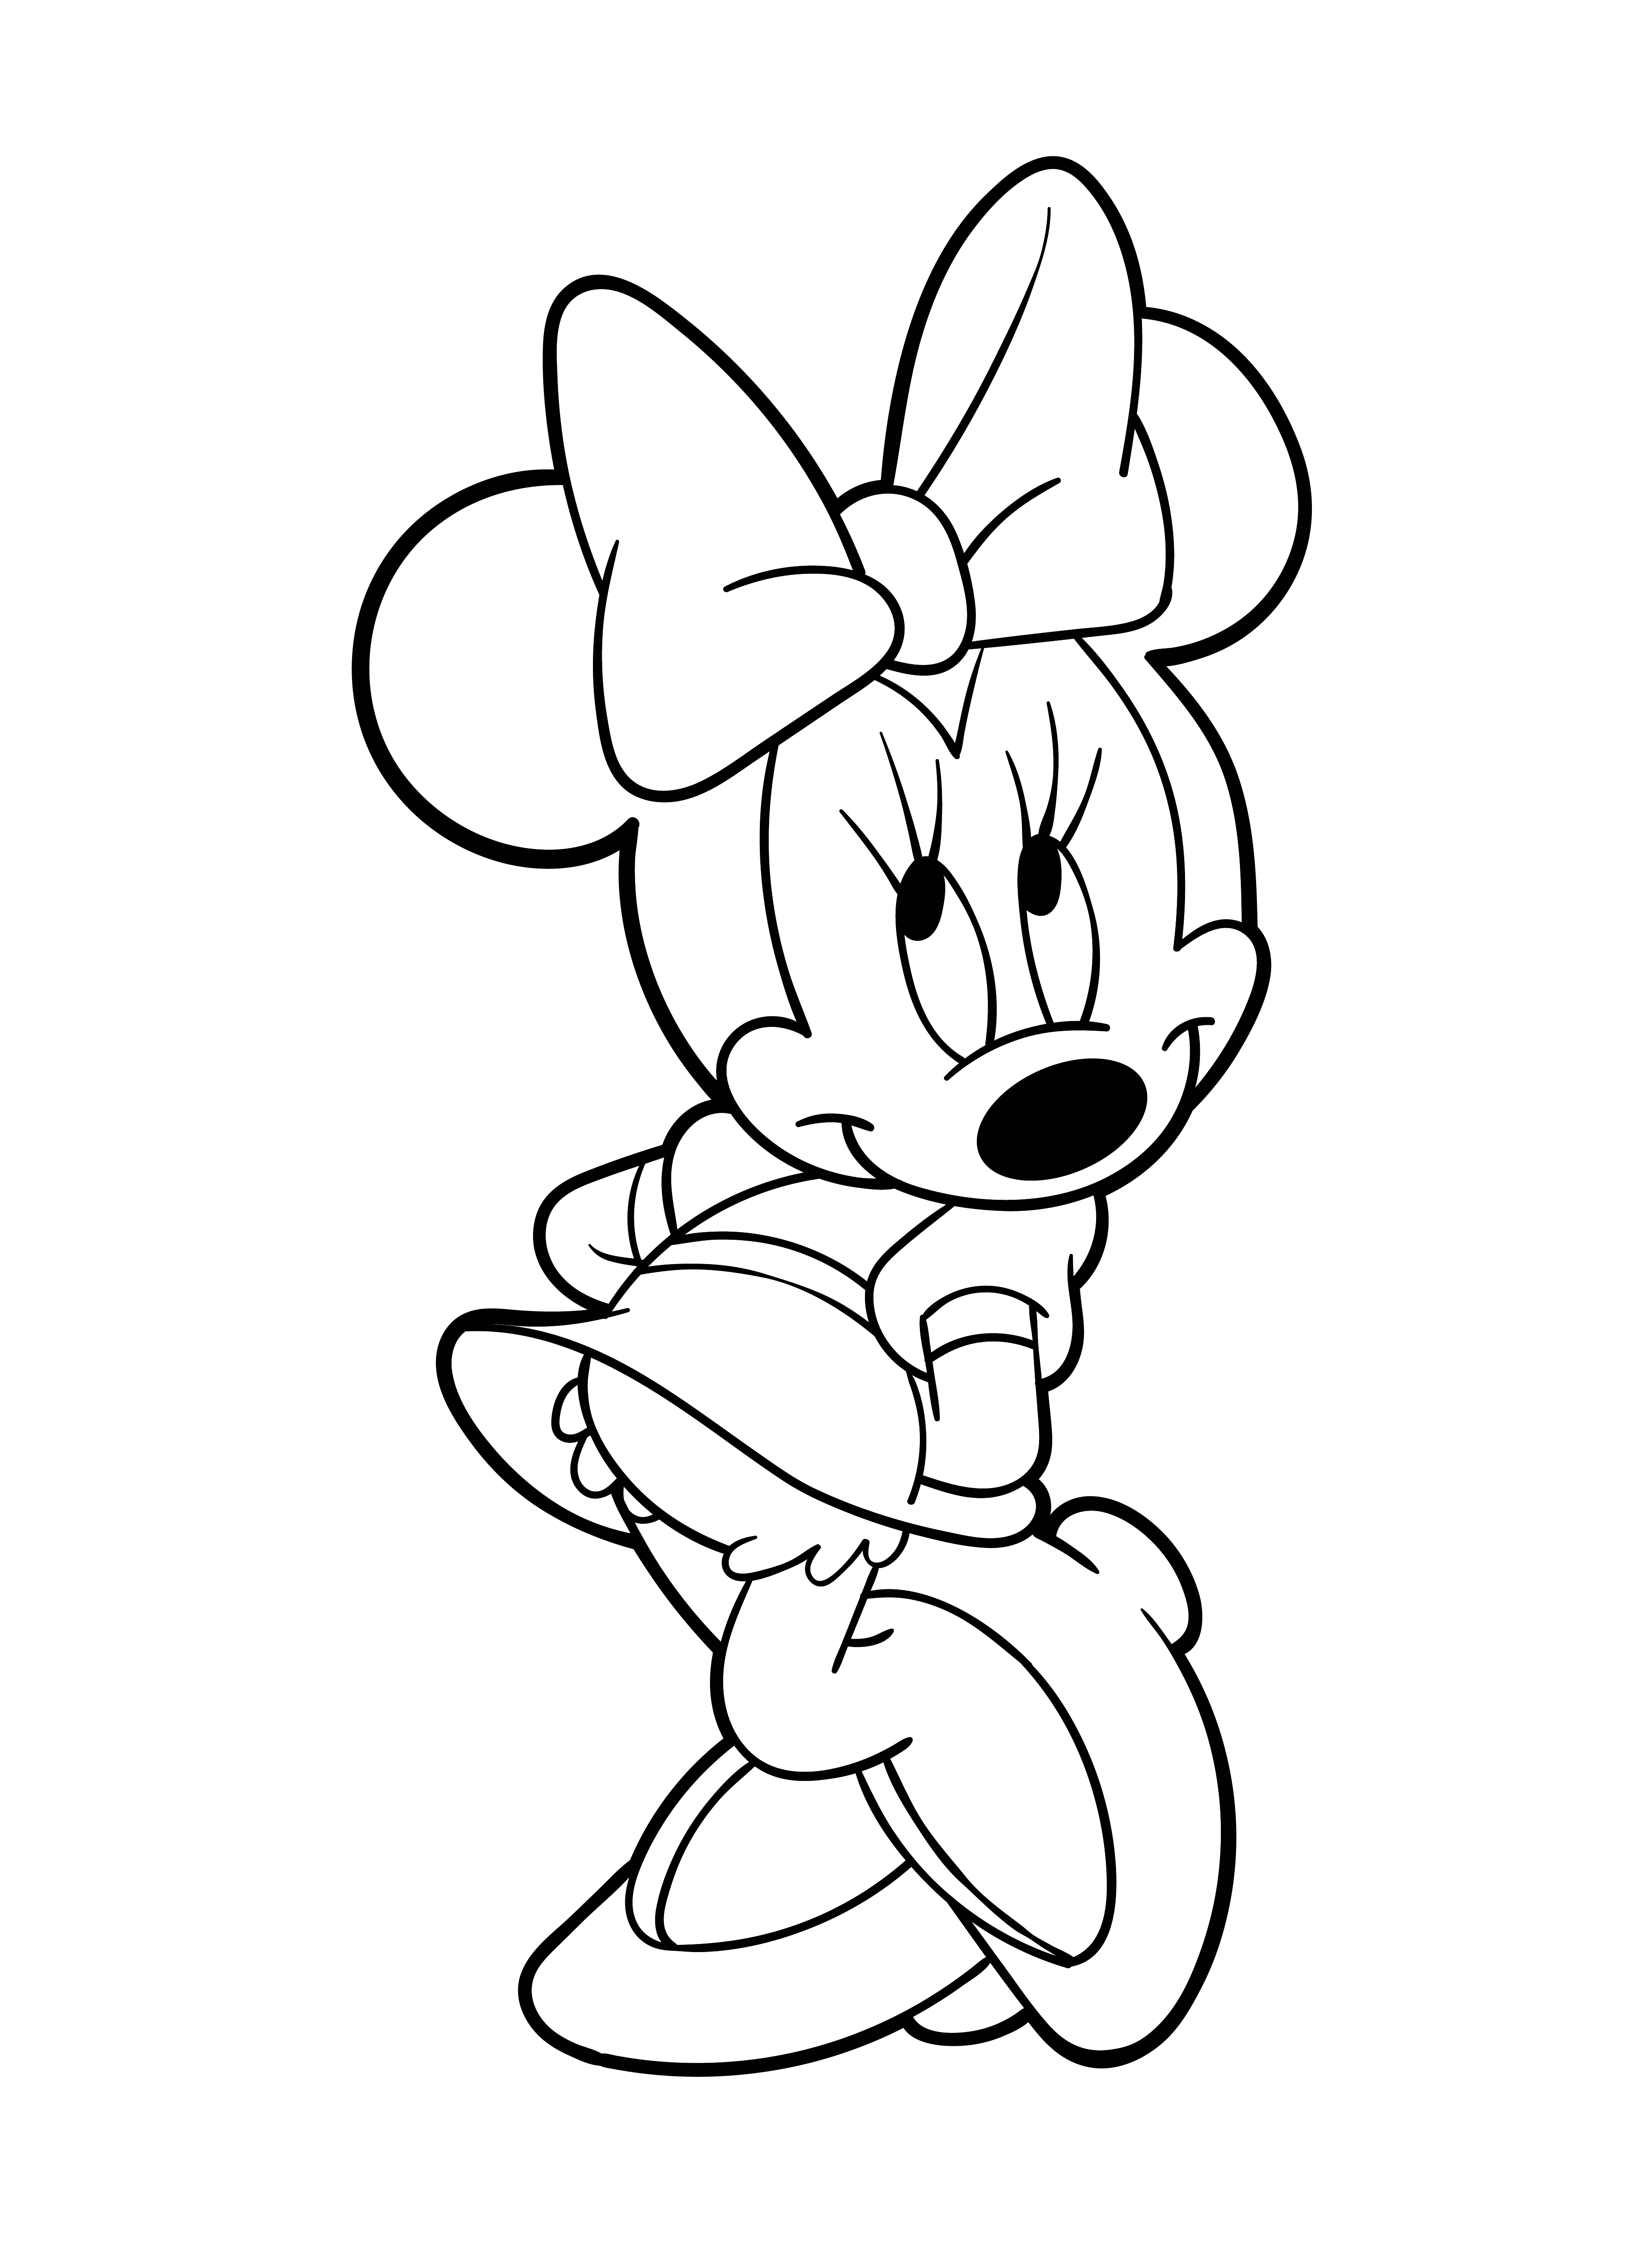 Minnie Mouse Coloring Pages 4